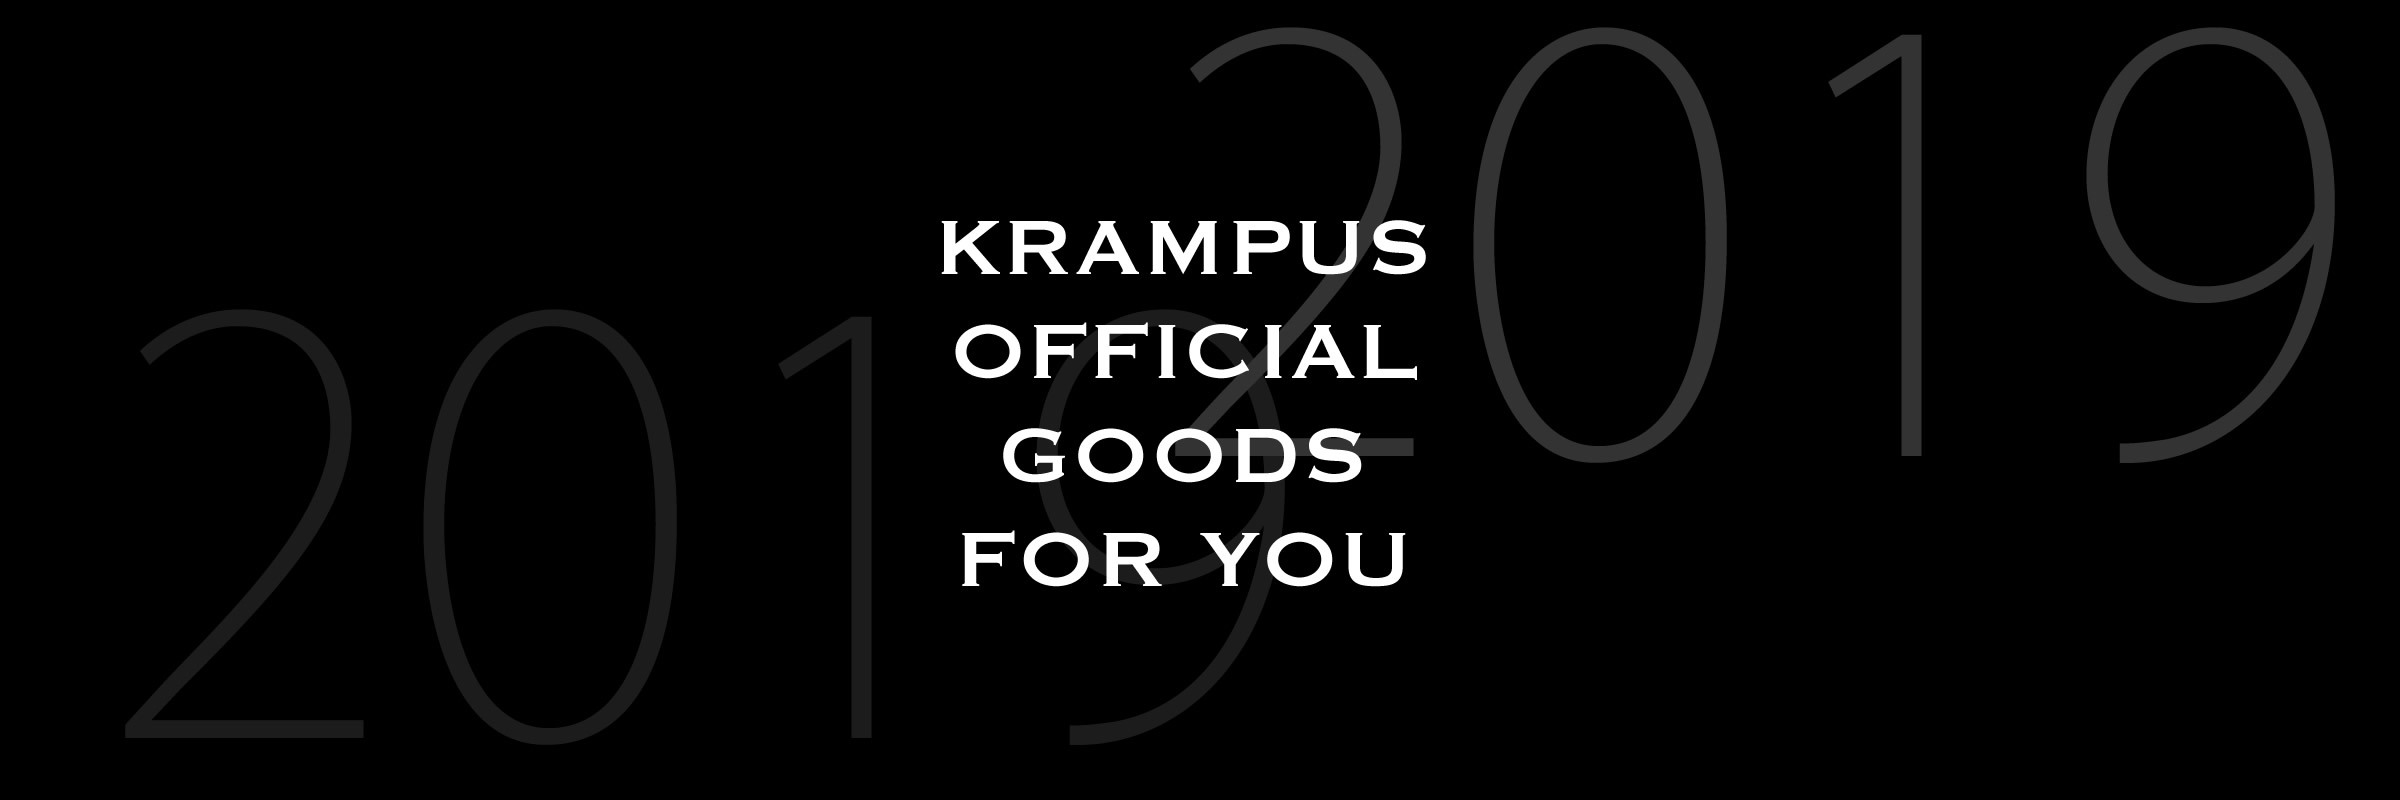 KRAMPUS OFFICIAL GOODS FOR YOU